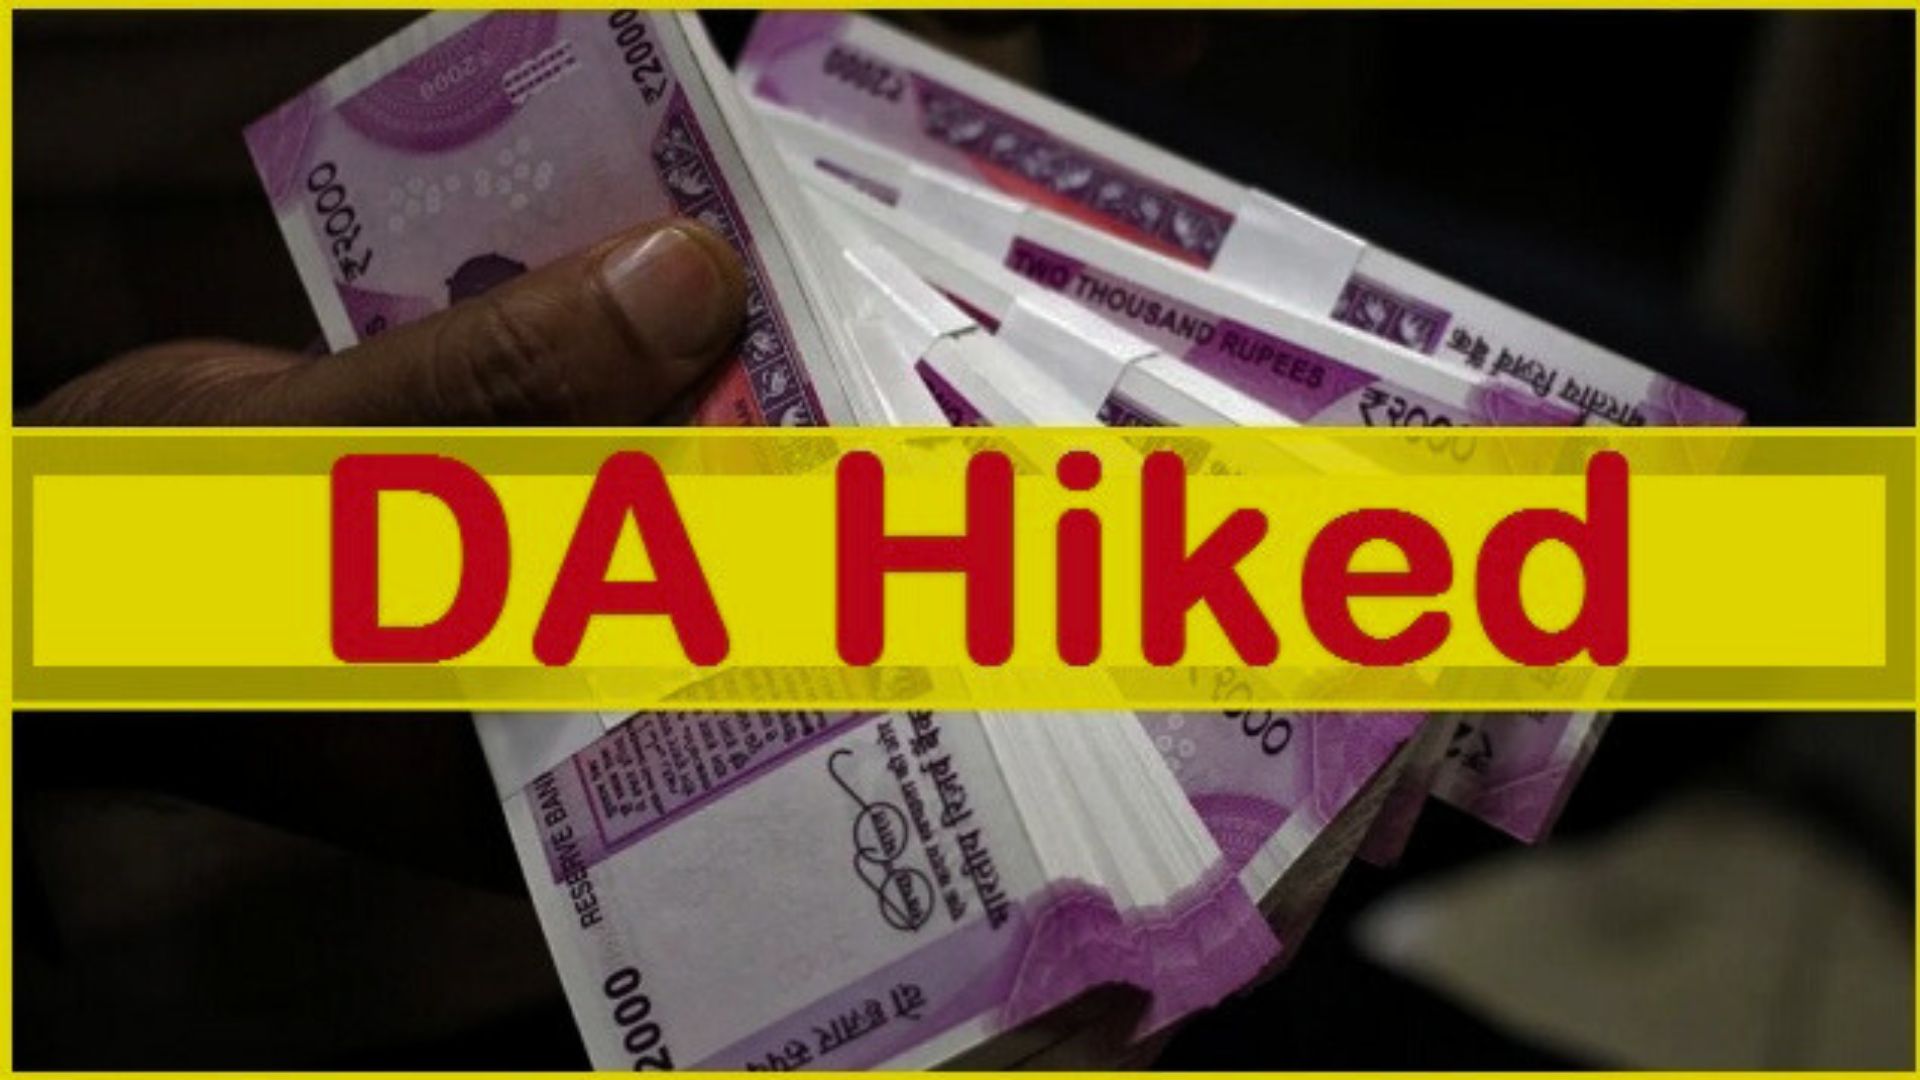 DA Hiked by 4% for employees & pensioners, Check update